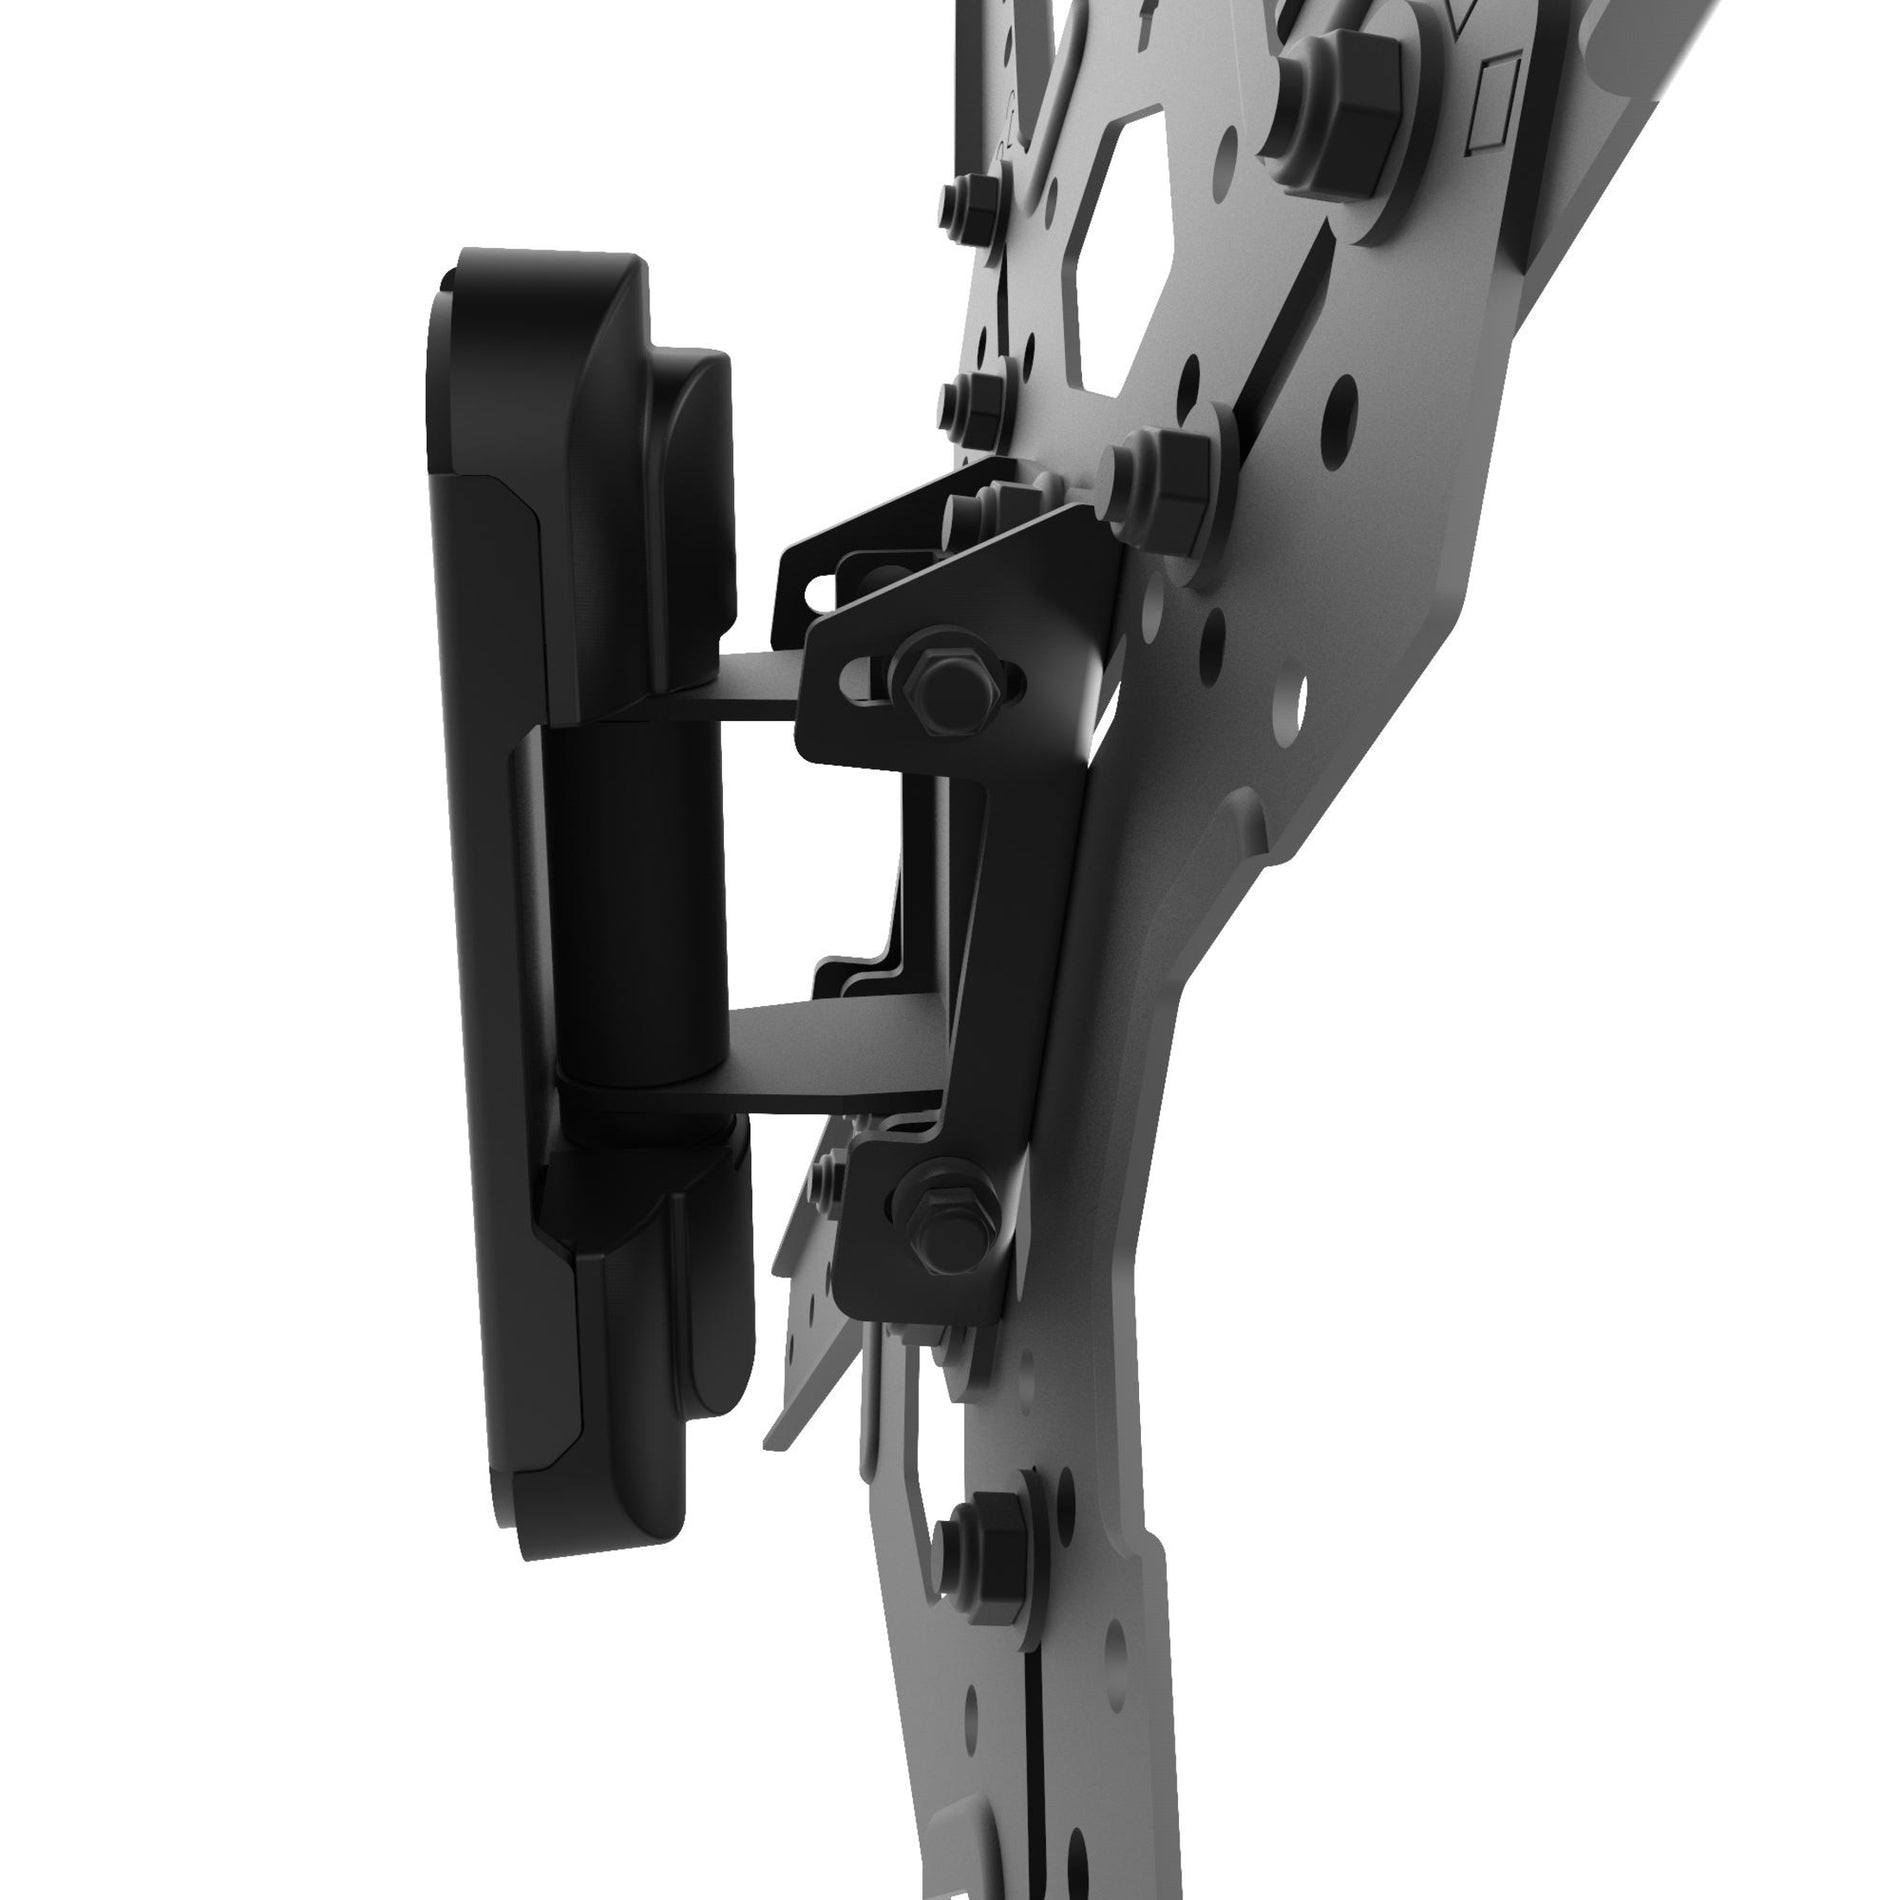 Kanto PS100 Tilt and Swivel TV Wall Mount for 26" to 60" TVs - Black [Discontinued]